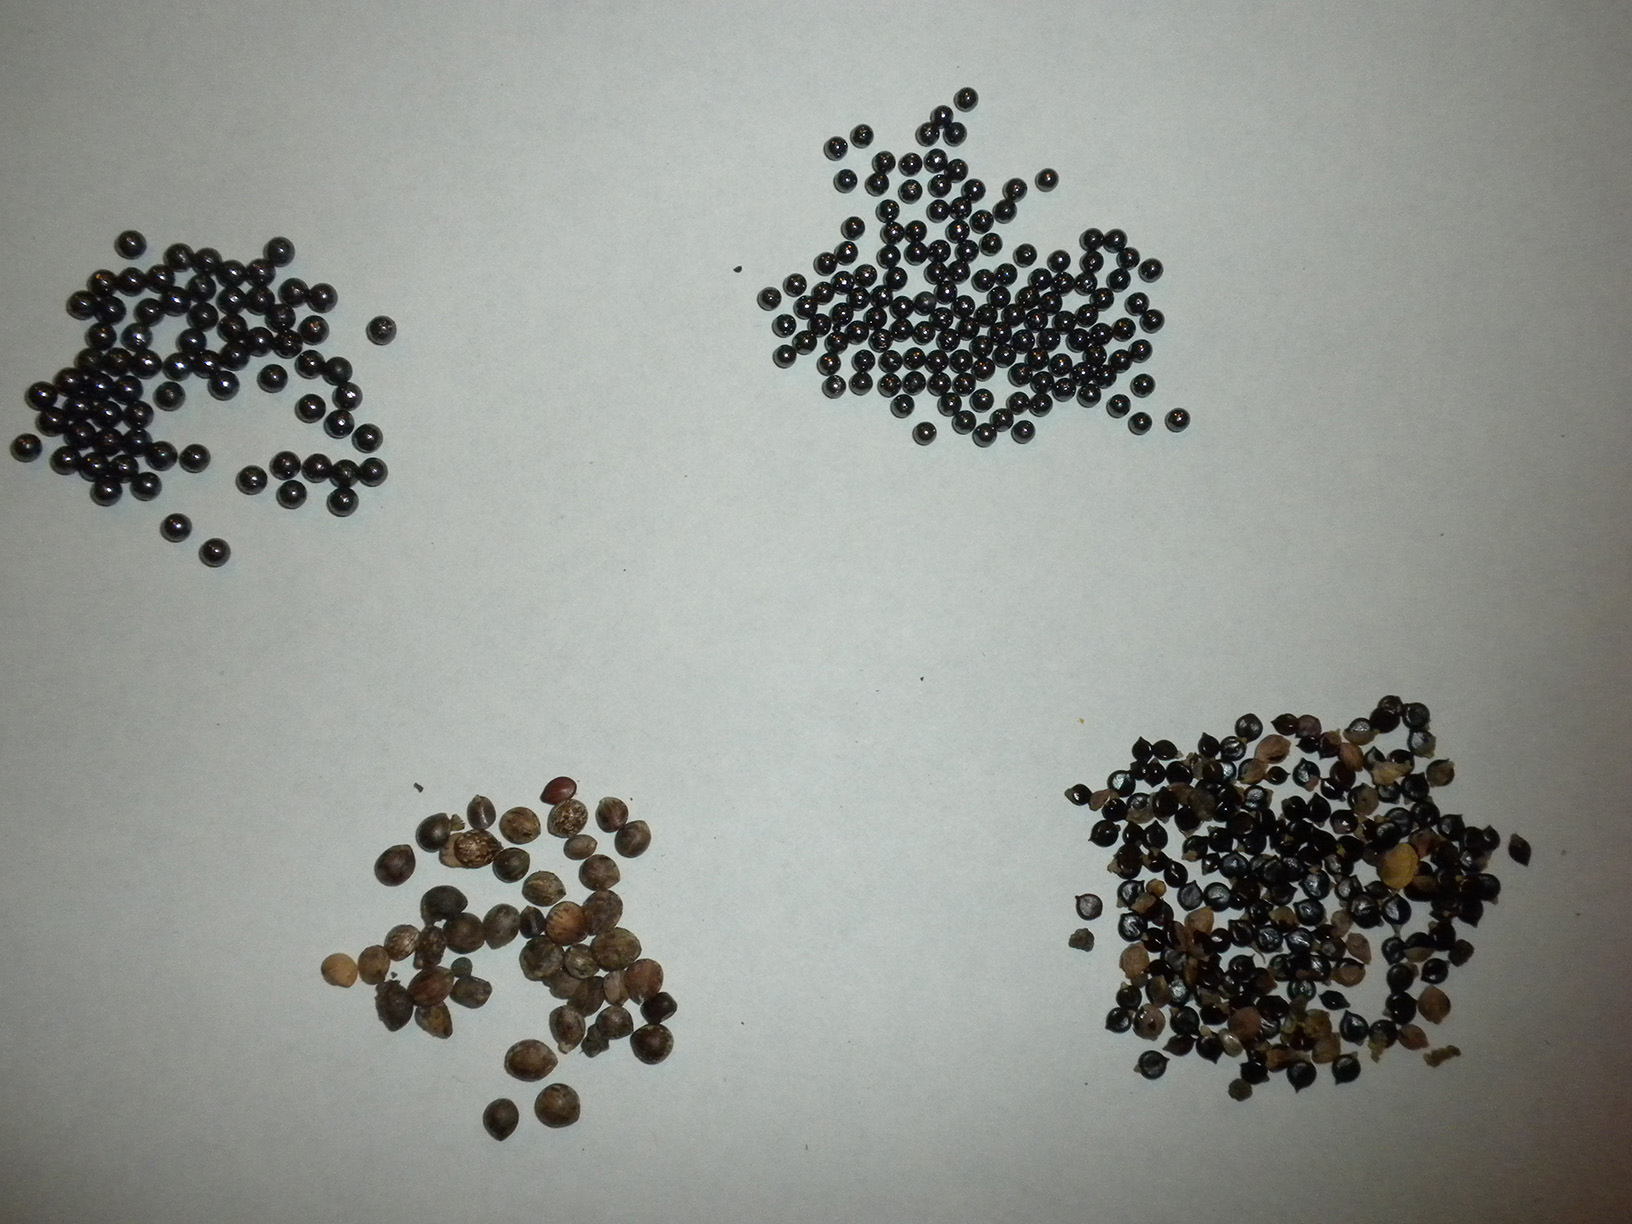 Difference in size between lead shots and seeds.